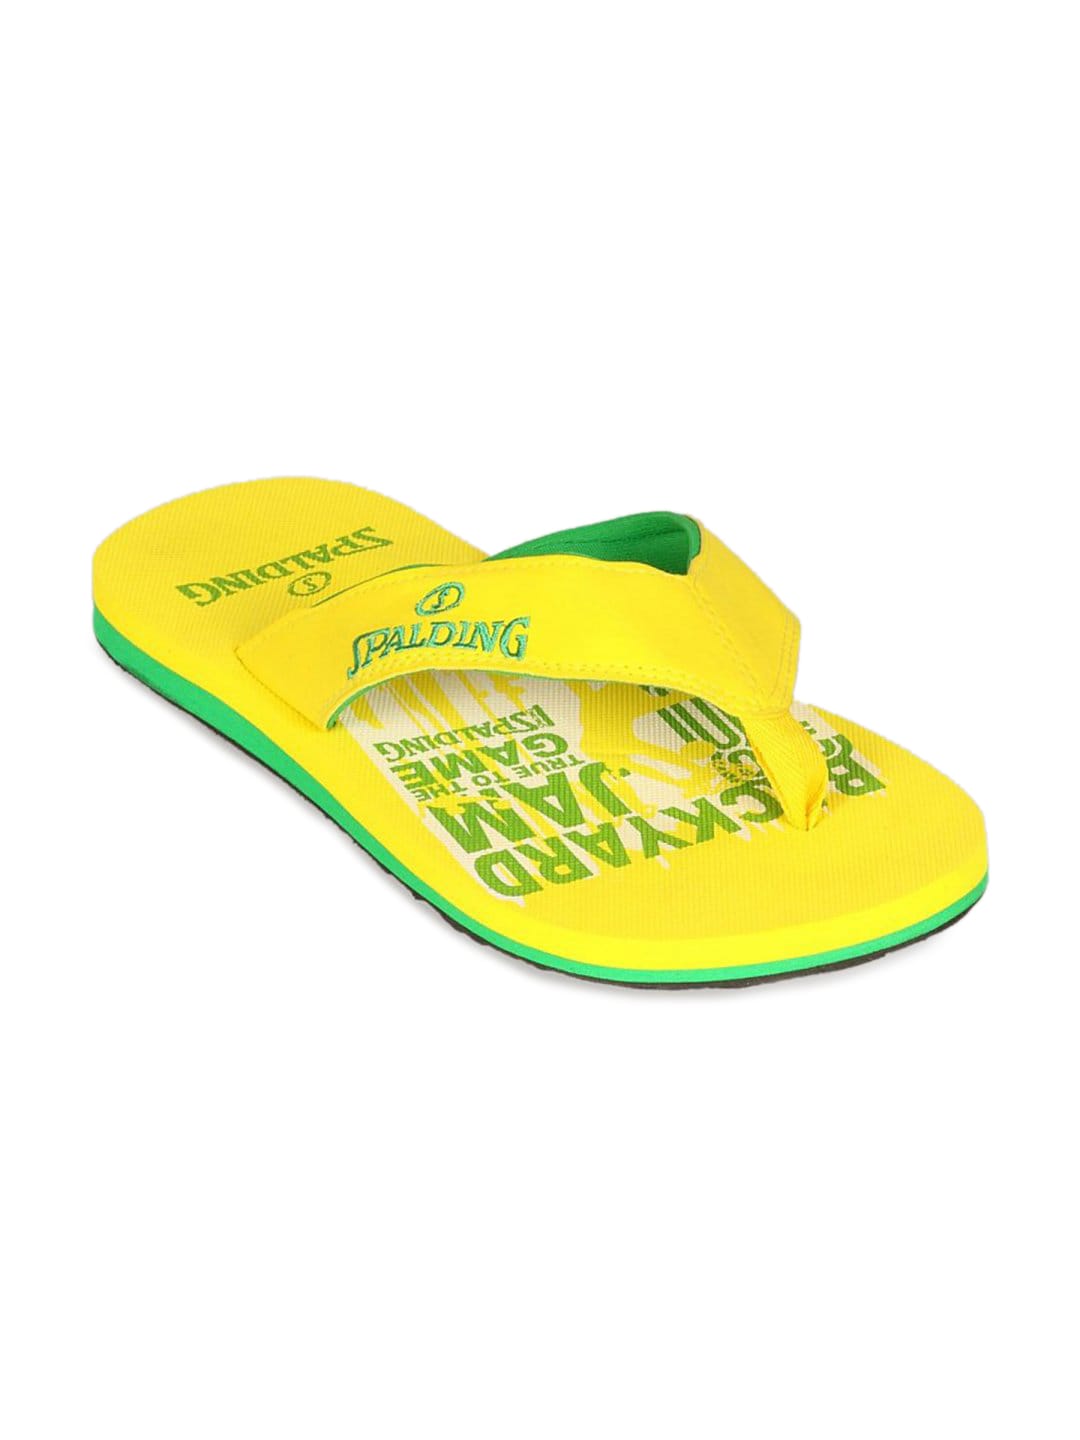 Spalding Men's Yellow And Green With Graphic Flip Flop